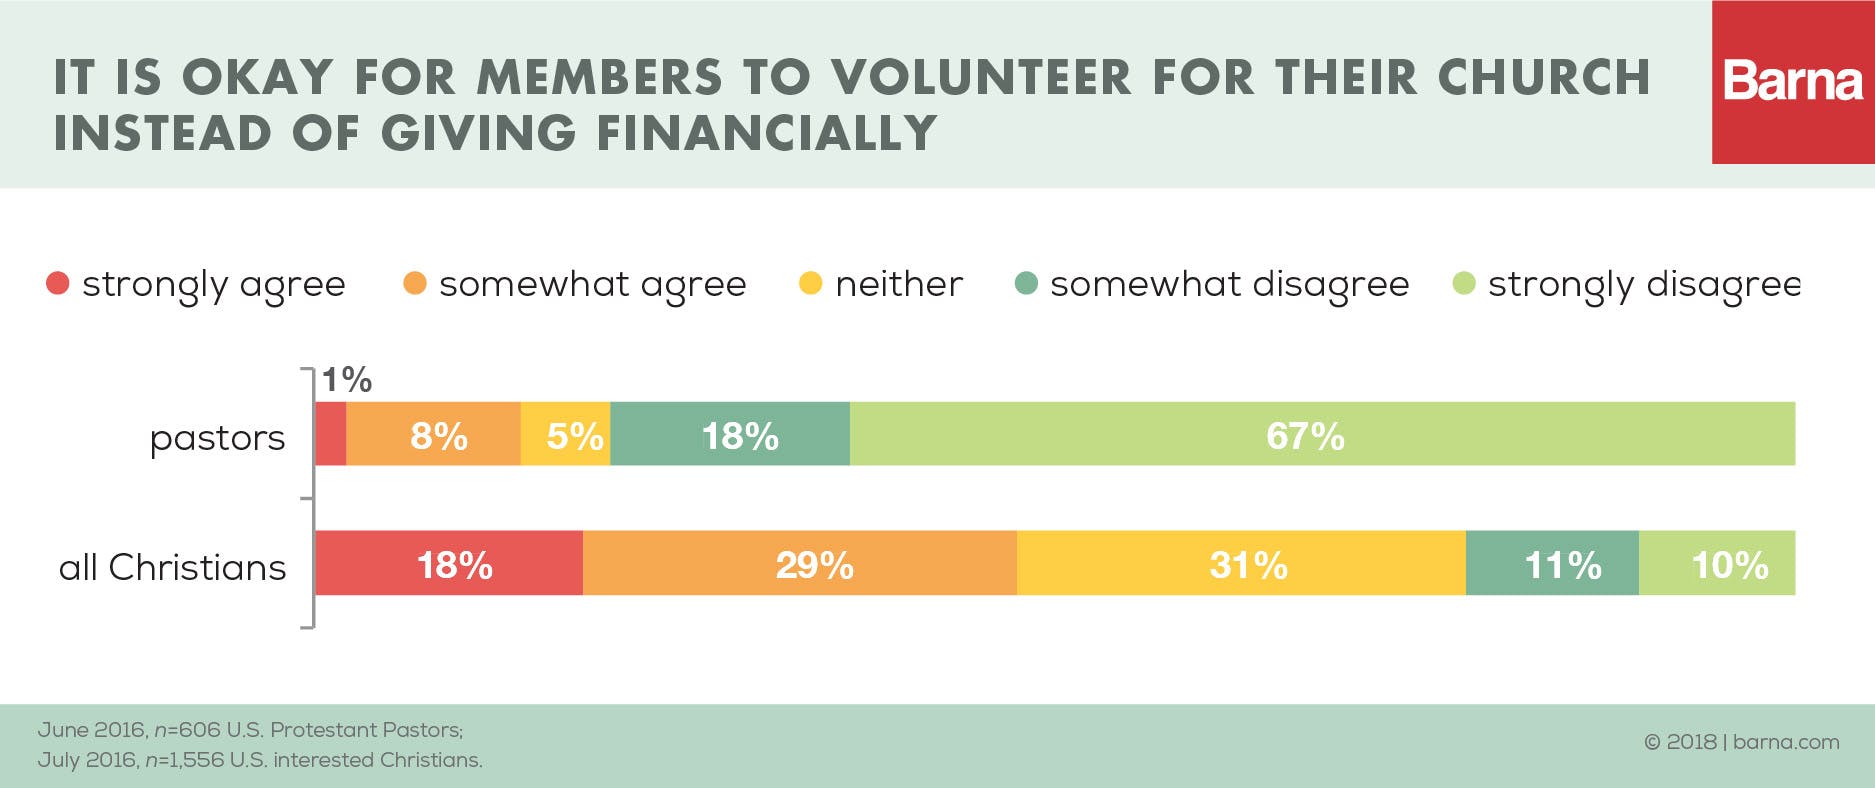 Volunteering and financial giving